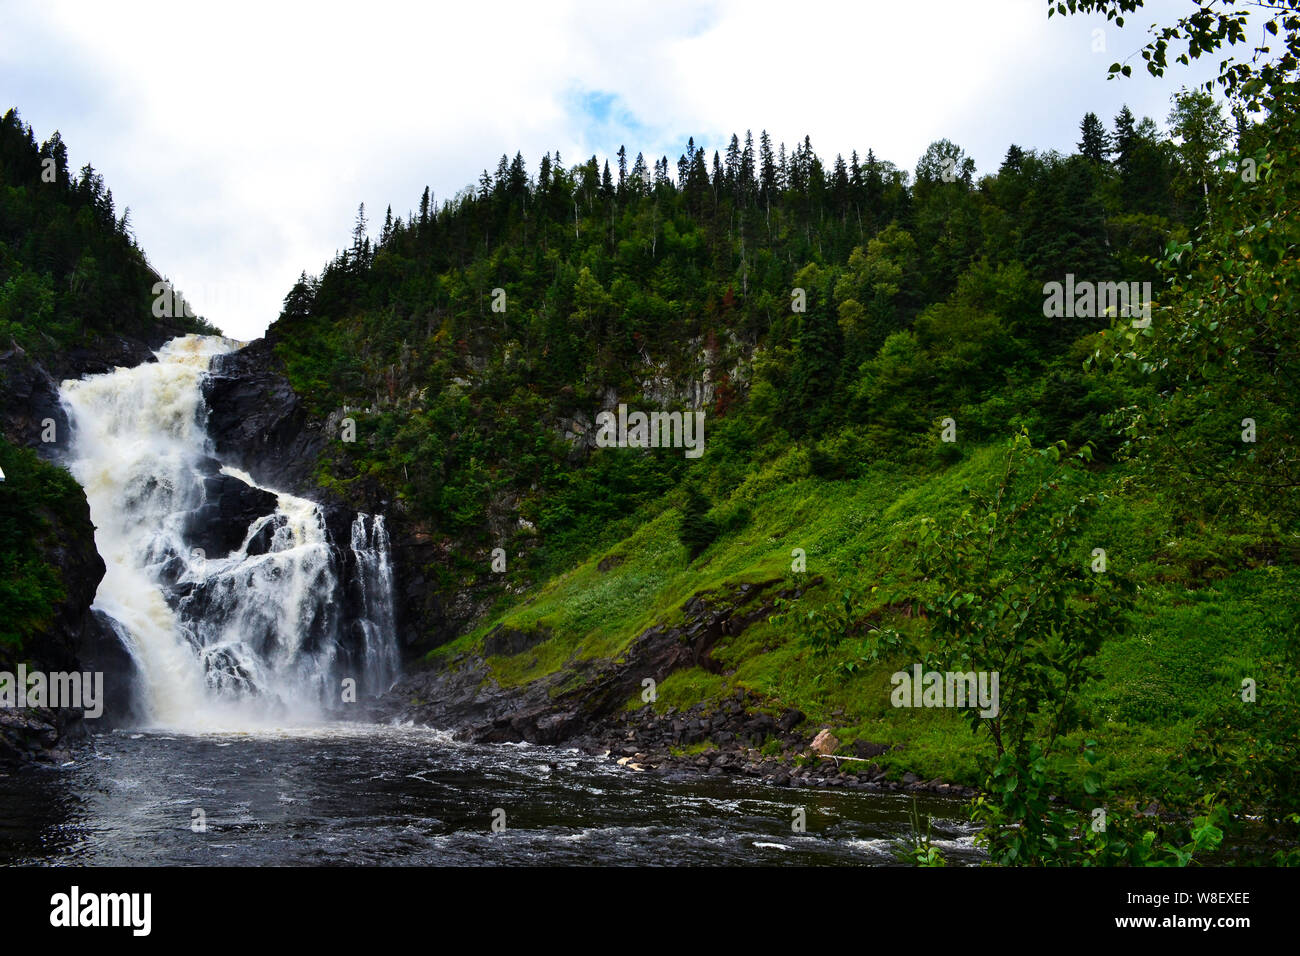 Lac st jean hi-res stock photography and images - Alamy